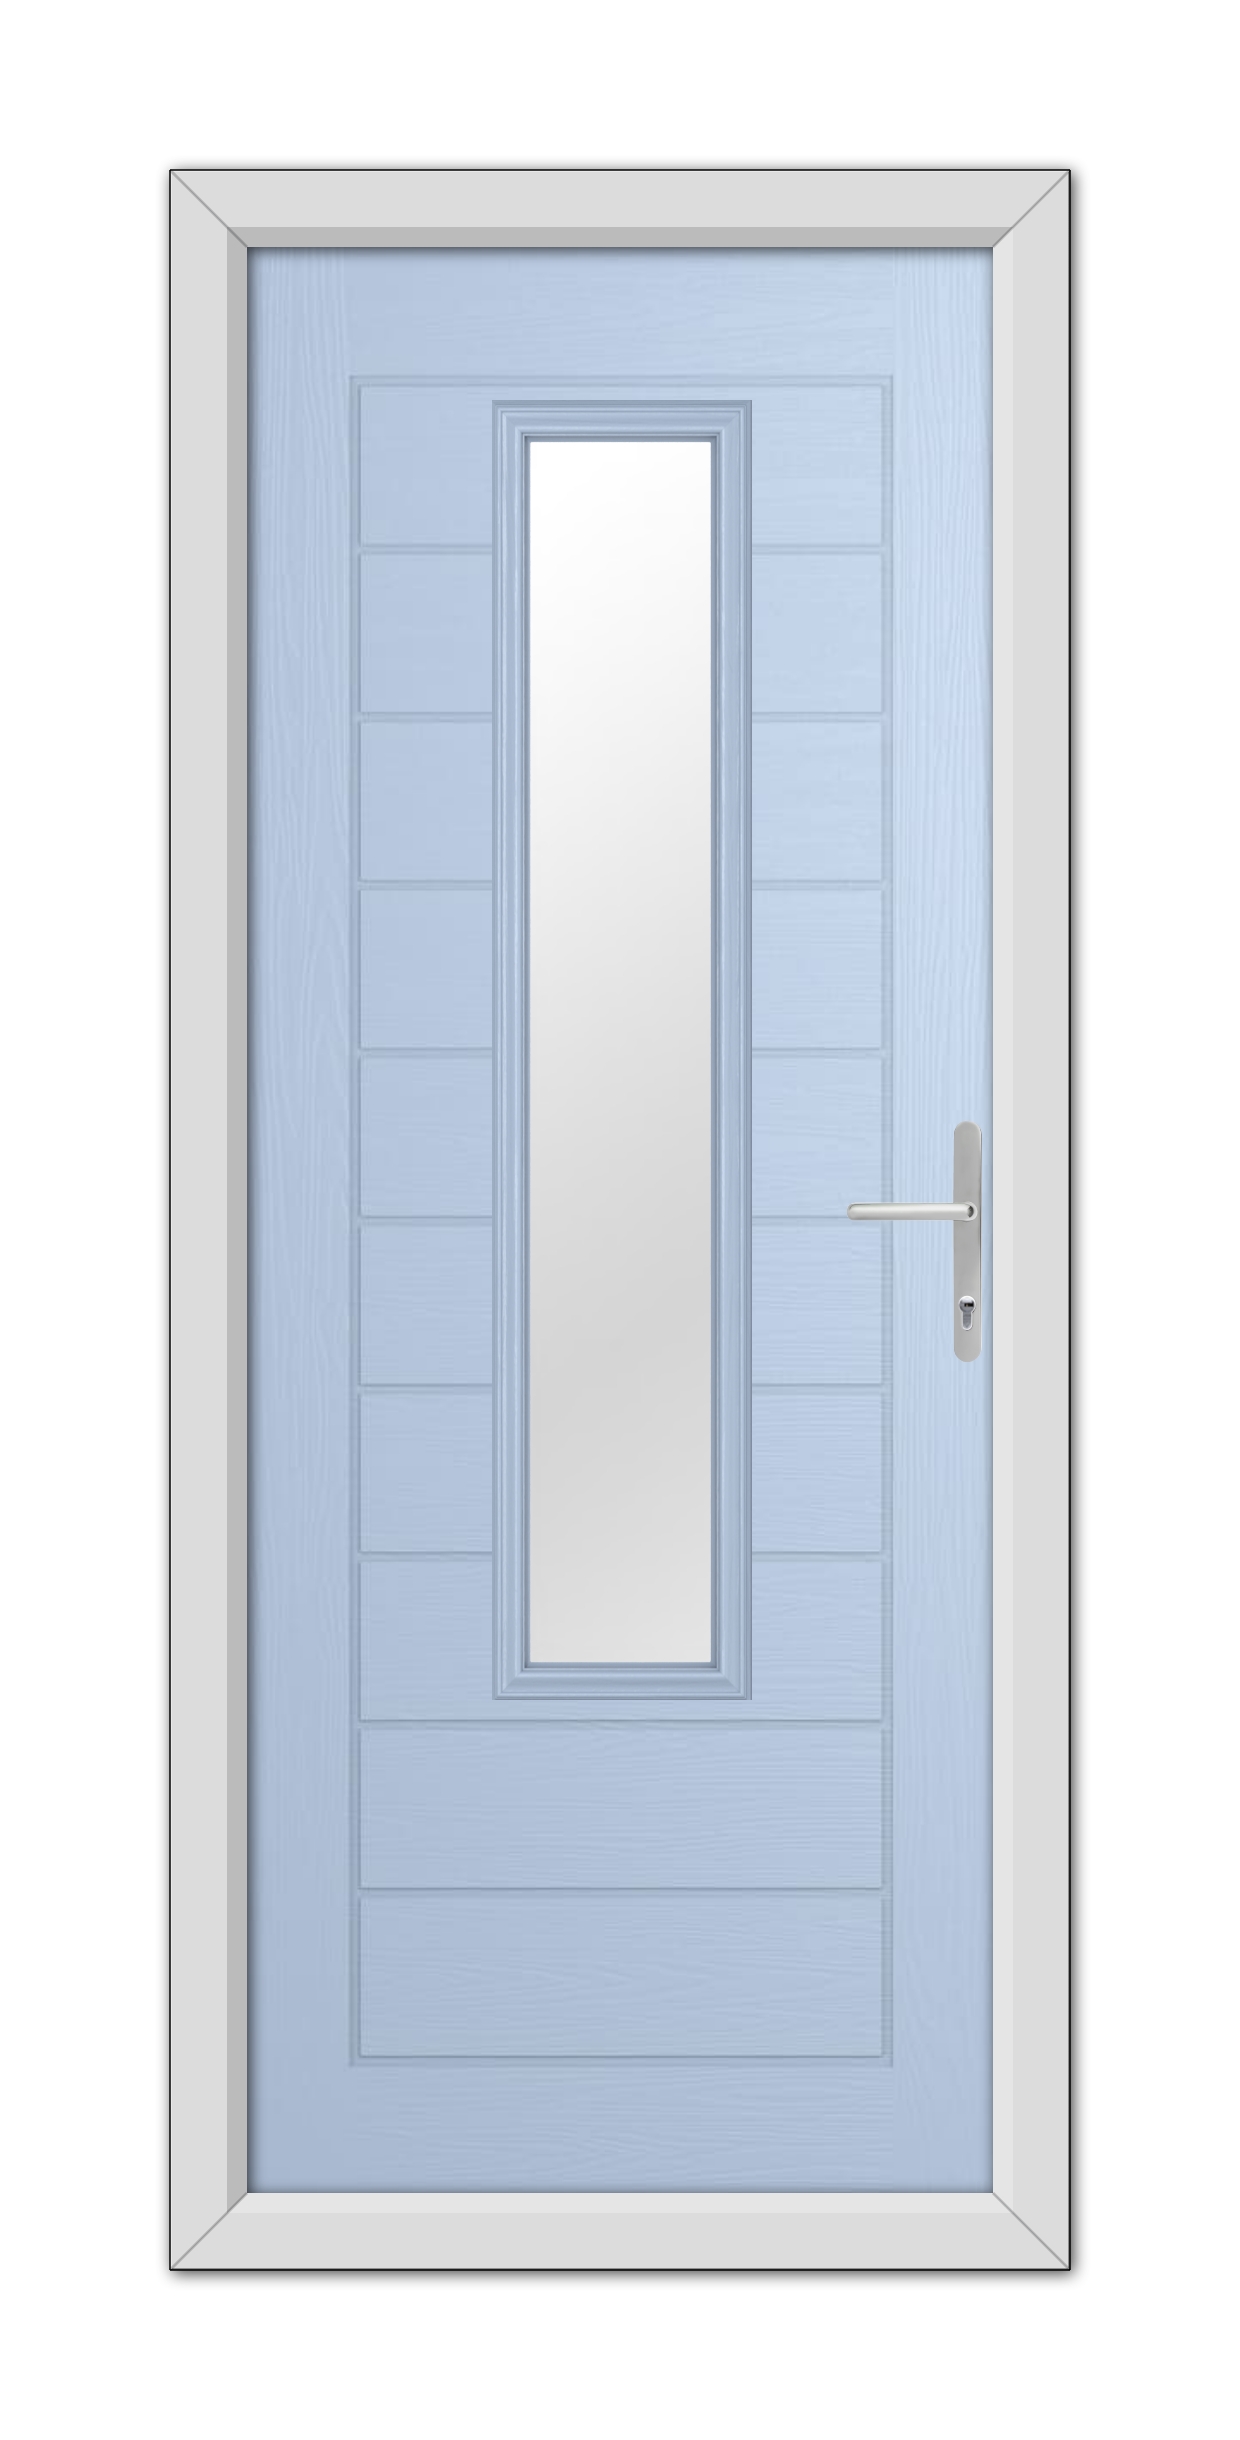 A Duck Egg Blue Bedford Composite Door with a vertical, rectangular glass panel and a silver handle, set within a white frame.